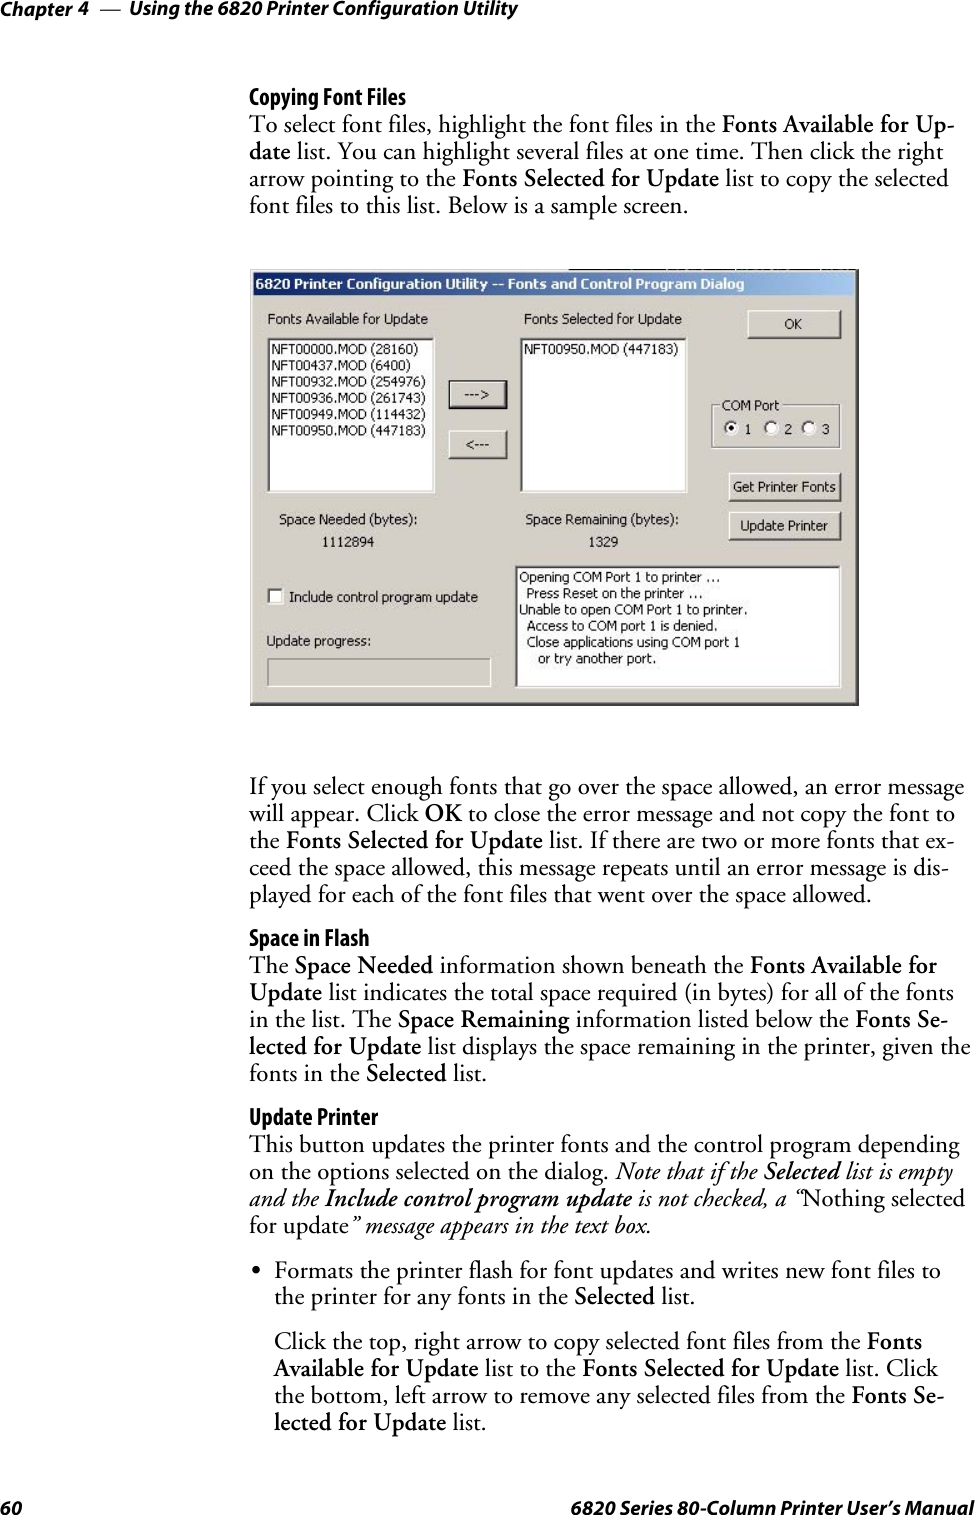 Using the 6820 Printer Configuration UtilityChapter —460 6820 Series 80-Column Printer User’s ManualCopying Font FilesTo select font files, highlight the font files in the Fonts Available for Up-date list. You can highlight several files at one time. Then click the rightarrow pointing to the Fonts Selected for Update list to copy the selectedfont files to this list. Below is a sample screen.If you select enough fonts that go over the space allowed, an error messagewill appear. Click OK to close the error message and not copy the font tothe Fonts Selected for Update list. If there are two or more fonts that ex-ceed the space allowed, this message repeats until an error message is dis-playedforeachofthefontfilesthatwentoverthespaceallowed.Space in FlashThe Space Needed information shown beneath the Fonts Available forUpdate list indicates the total space required (in bytes) for all of the fontsin the list. The Space Remaining information listed below the Fonts Se-lected for Update list displays the space remaining in the printer, given thefonts in the Selected list.Update PrinterThis button updates the printer fonts and the control program dependingon the options selected on the dialog. Note that if the Selected list is emptyand the Include control program update is not checked, a “Nothing selectedfor update” message appears in the text box.SFormats the printer flash for font updates and writes new font files tothe printer for any fonts in the Selected list.Click the top, right arrow to copy selected font files from the FontsAvailable for Update list to the Fonts Selected for Update list. Clickthe bottom, left arrow to remove any selected files from the Fonts Se-lected for Update list.